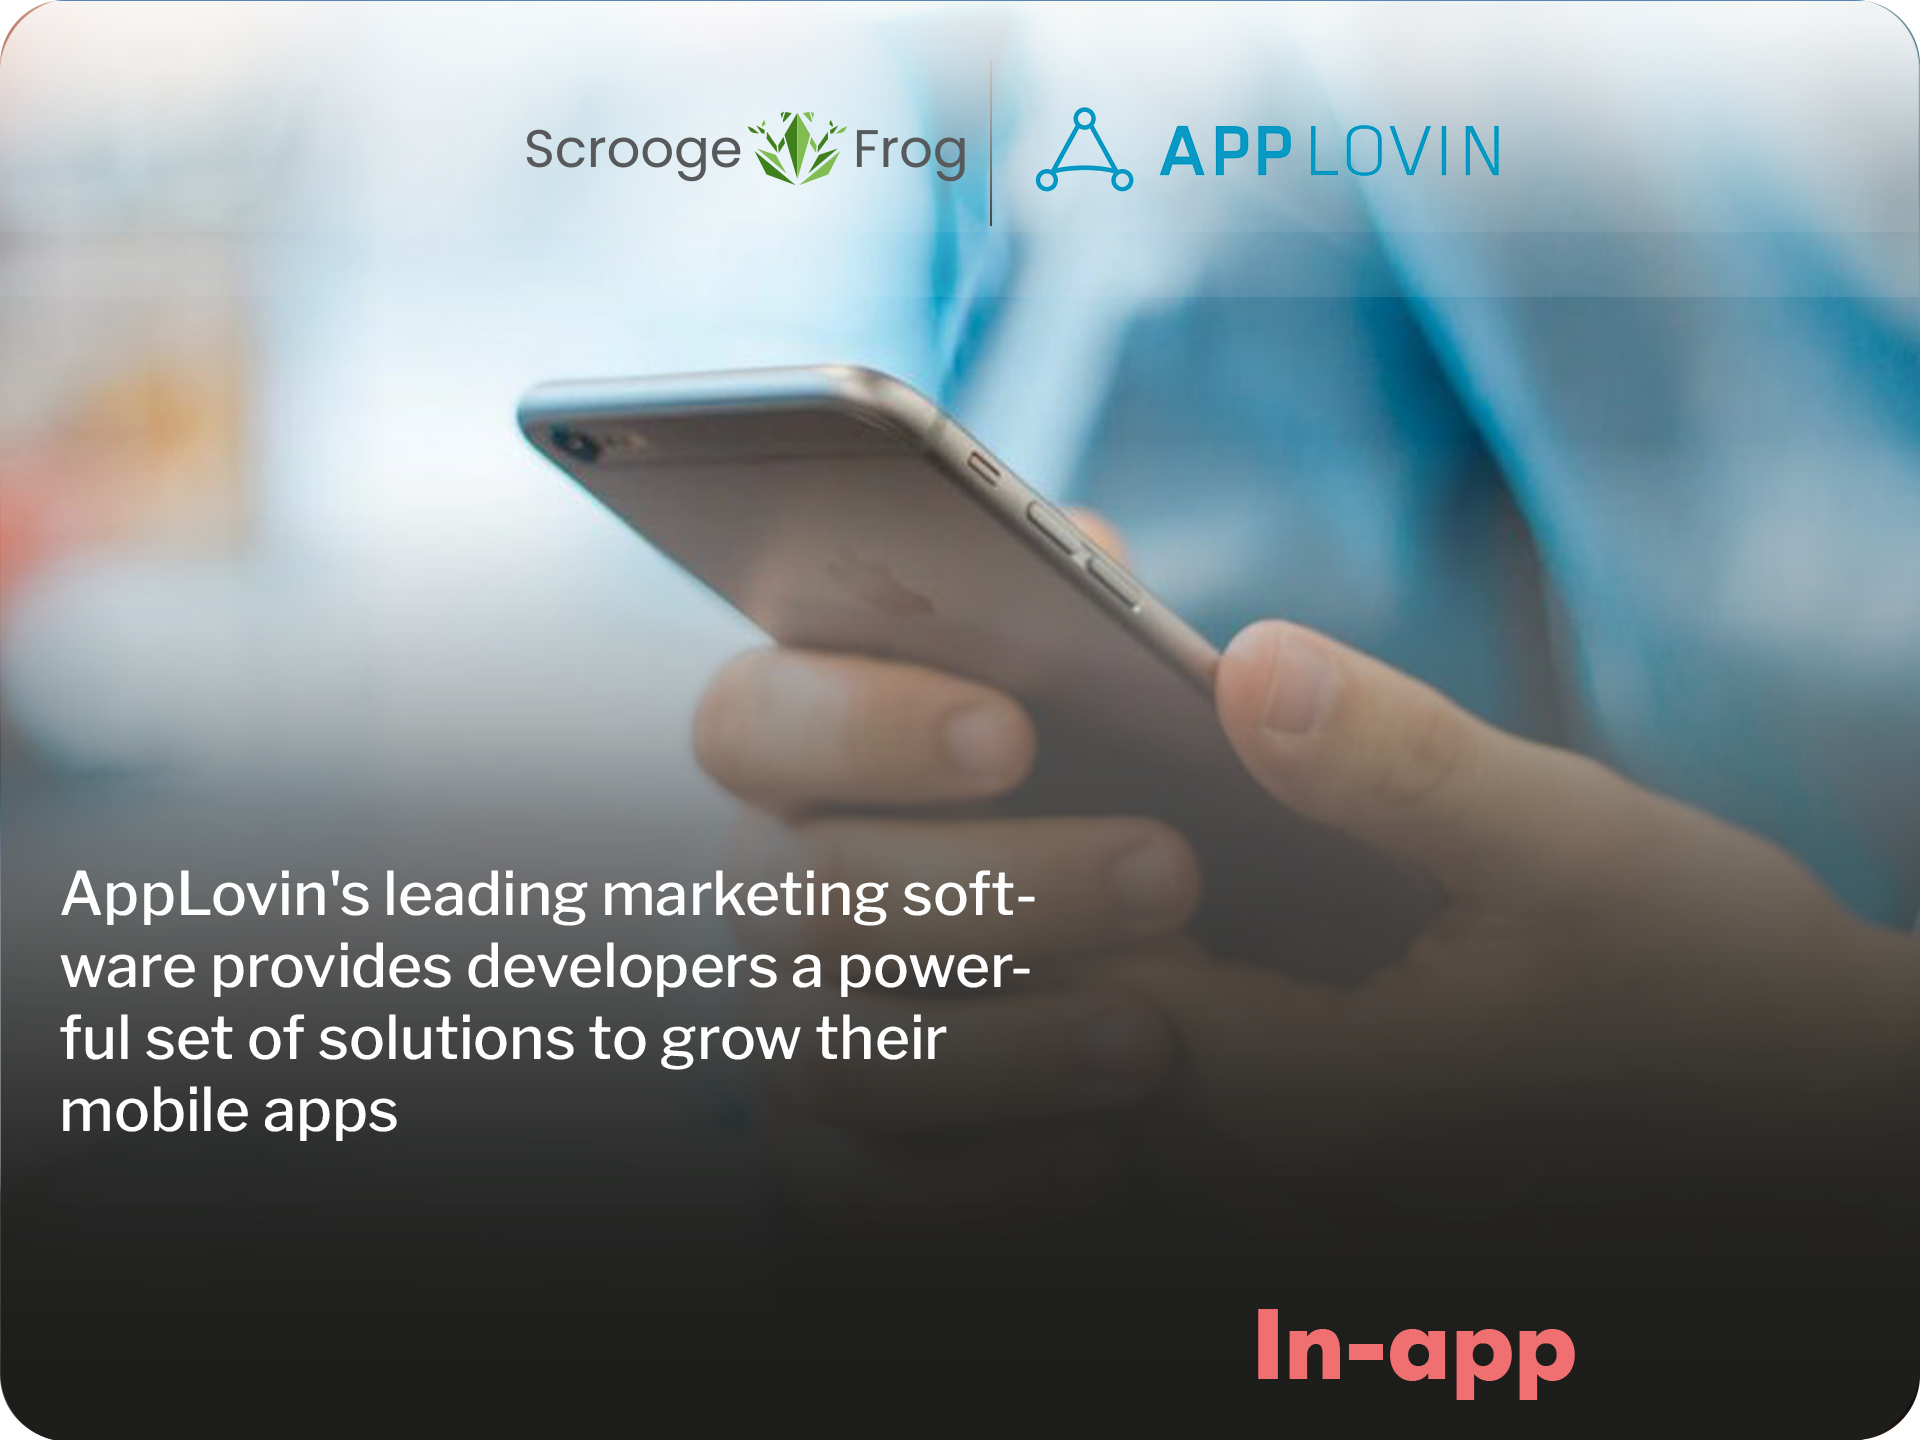 AppLovin’s leading marketing software provides developers a powerful set of solutions to grow their mobile apps